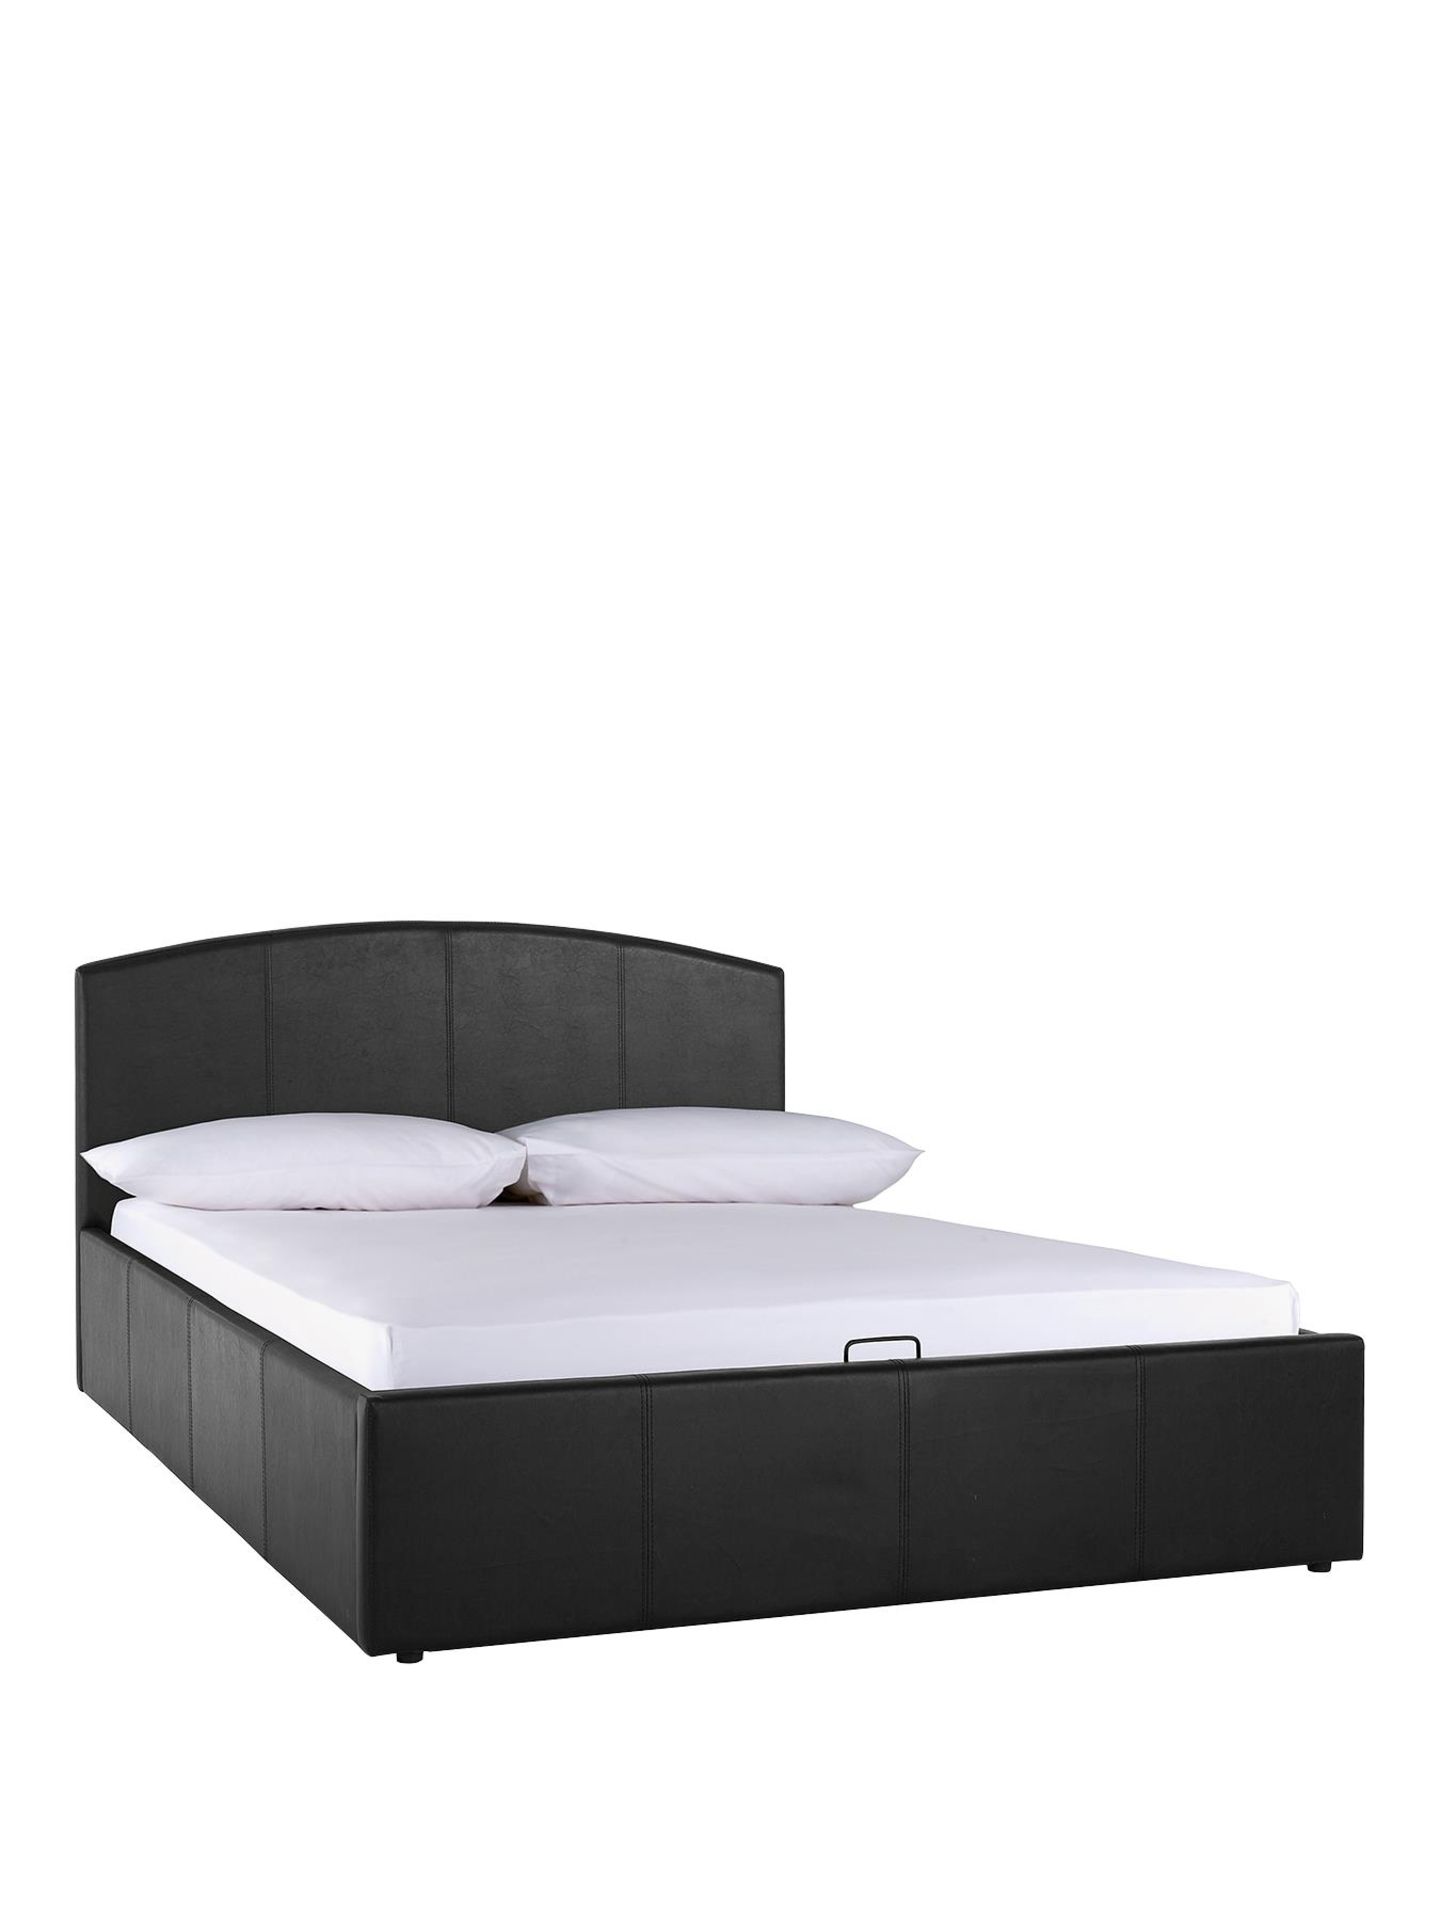 Boxed Item Marston King Lift-Up Bed [Black] 88X159X212Cm Rrp:£538.0 - Image 2 of 2